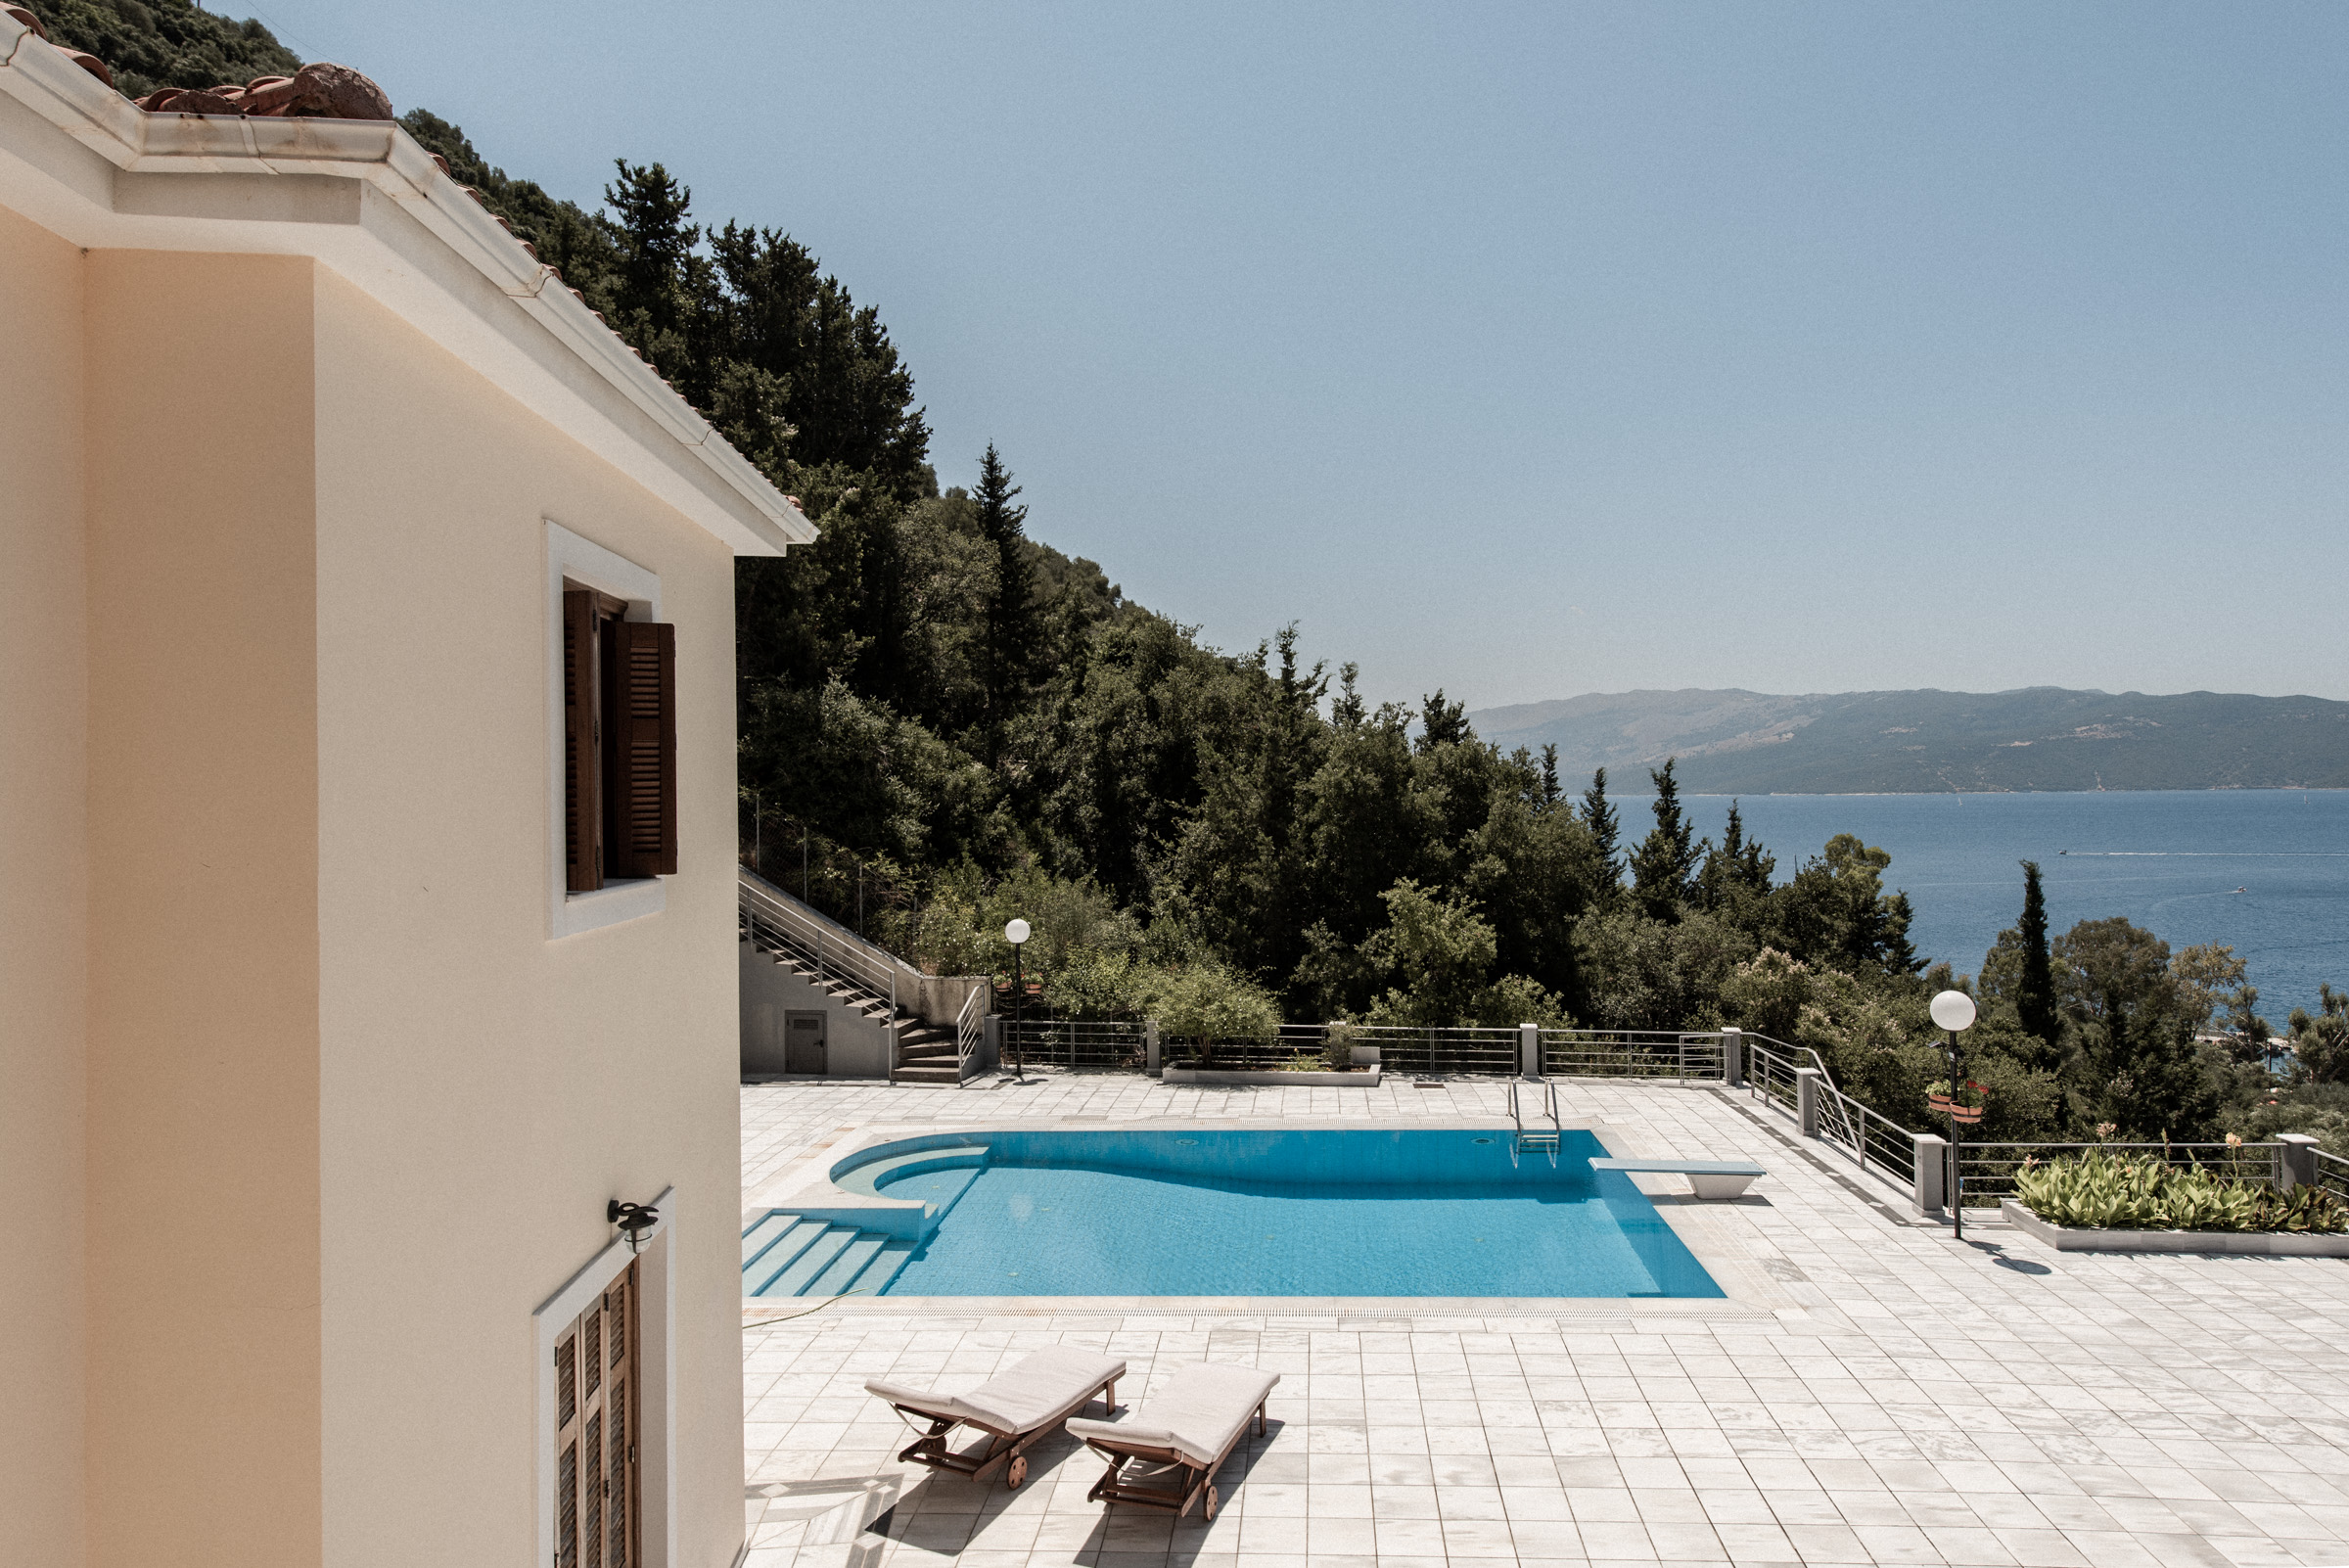 Swimming pool and views of villa for rent on Ithaca Greece, Stavros